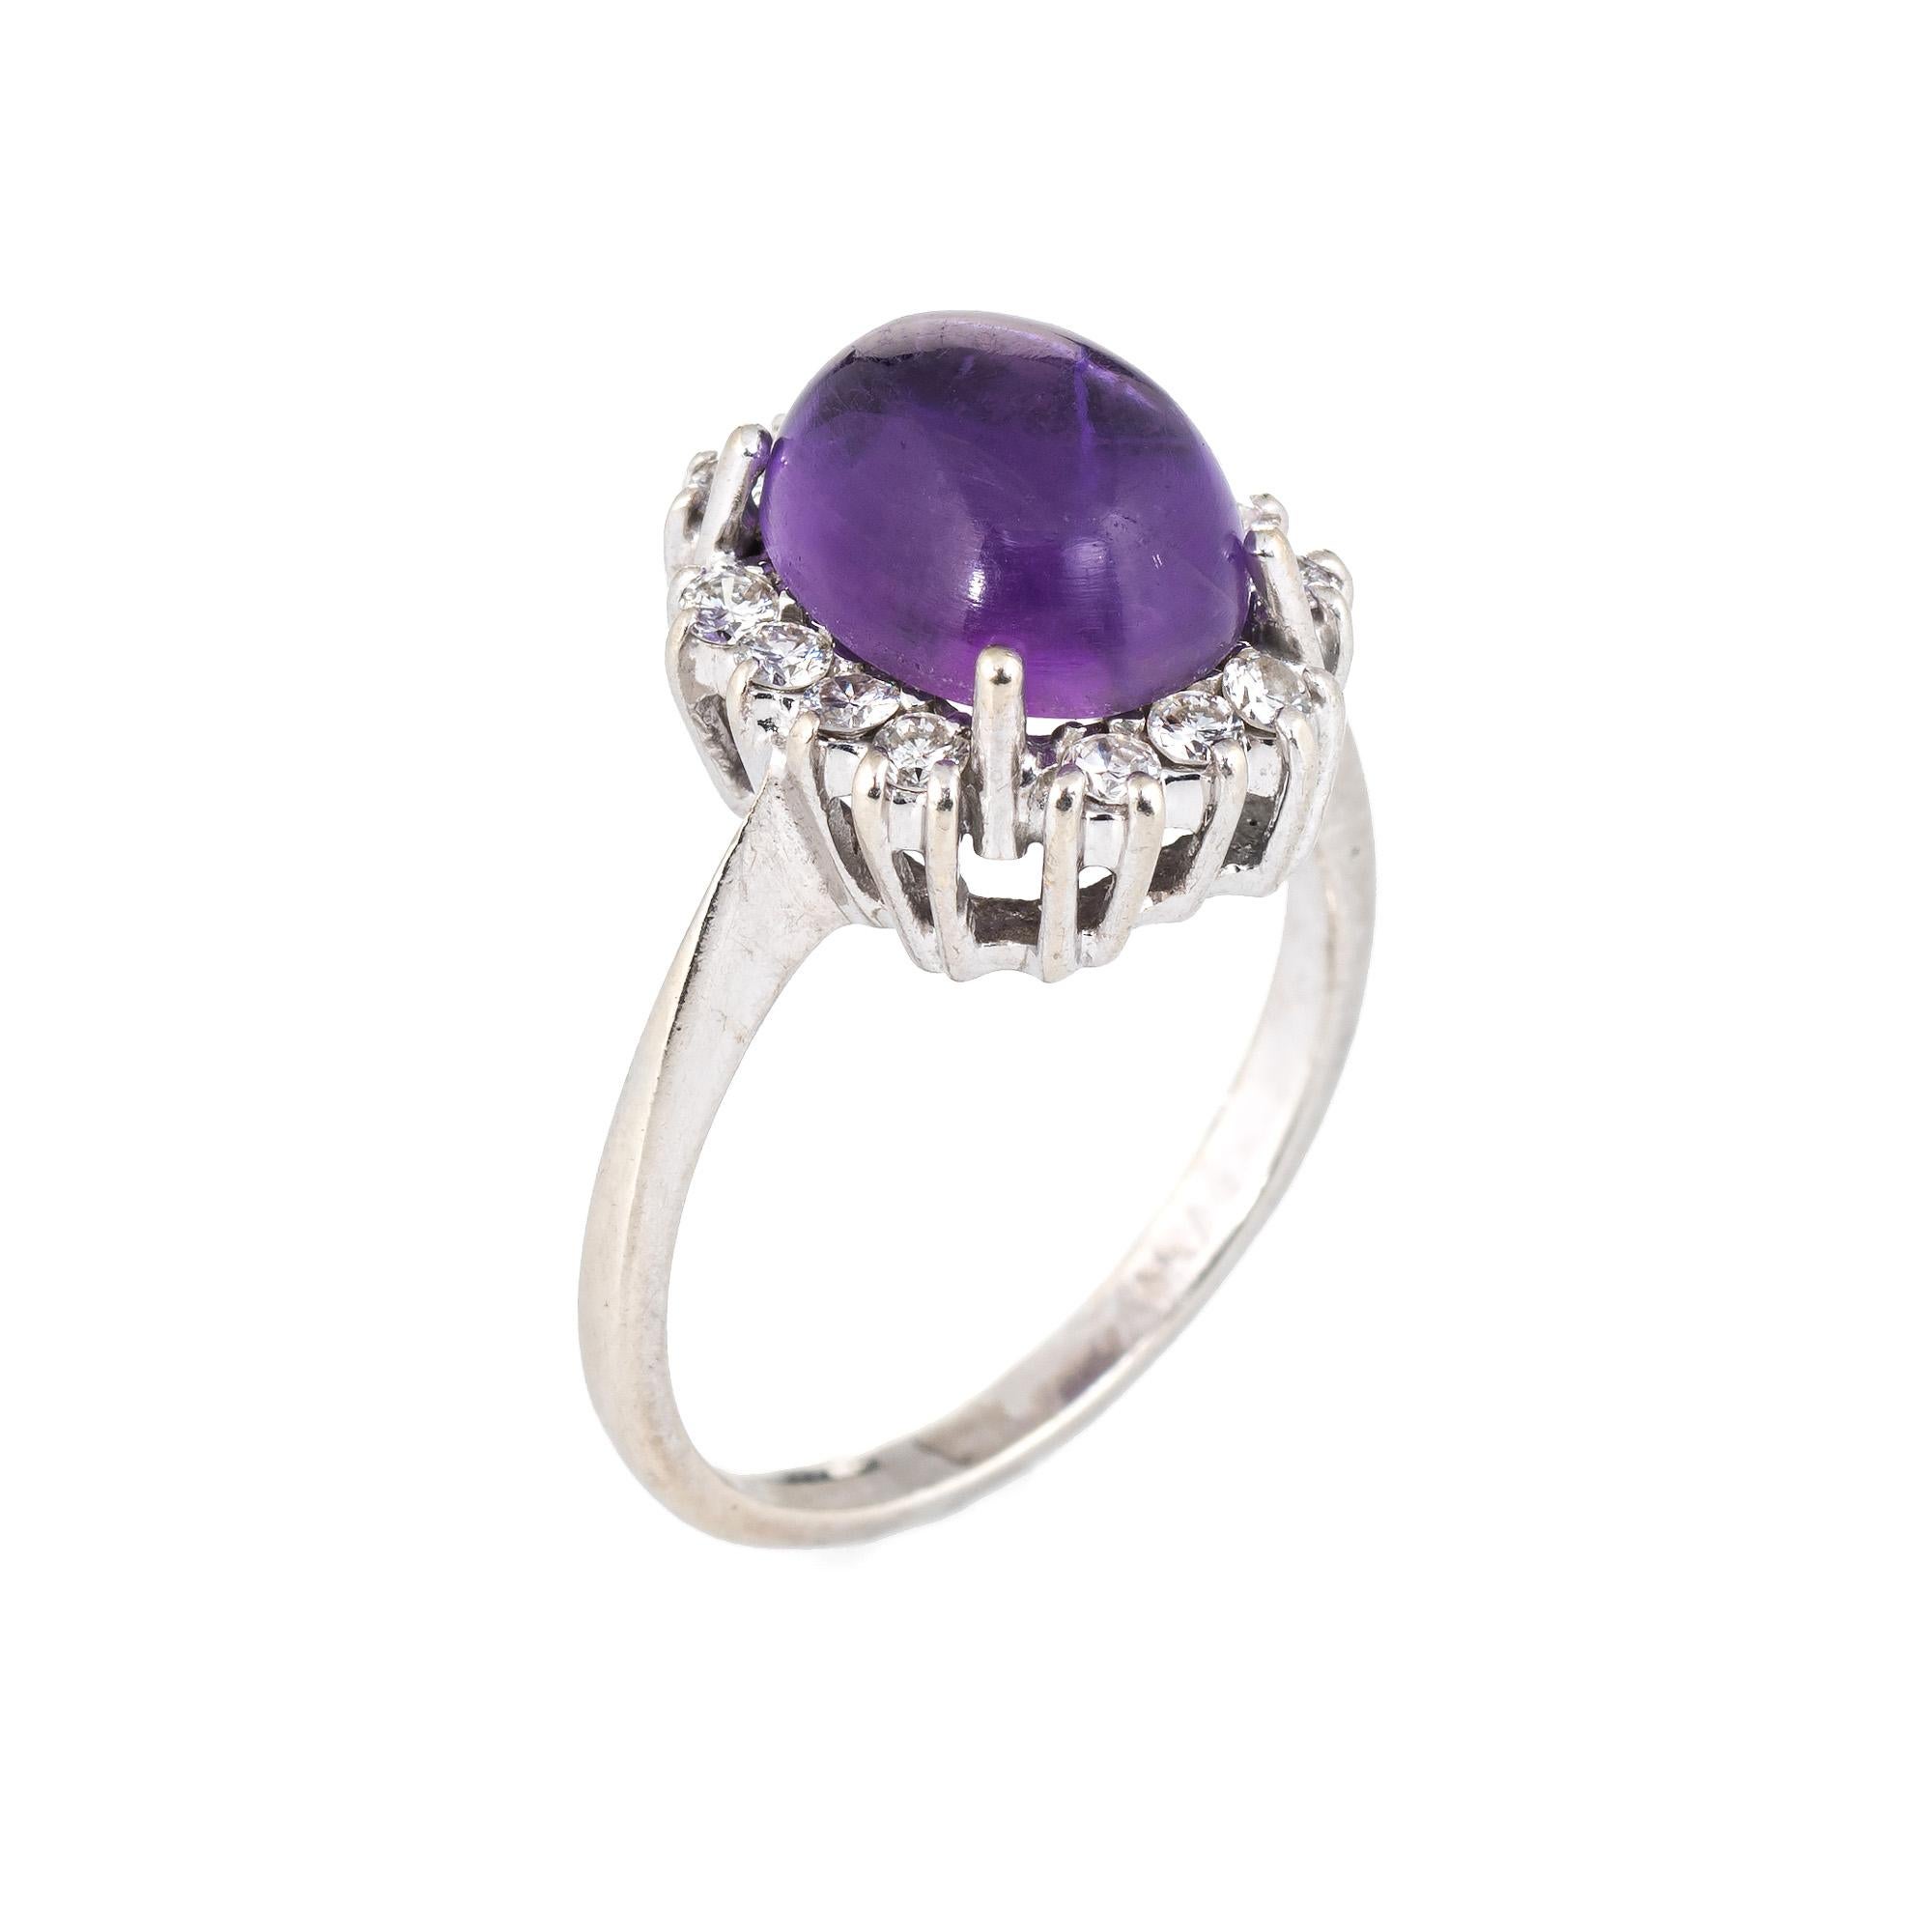 Elegant vintage amethyst & diamond ring (circa 1960s to 1970s), crafted in 14 karat white gold. 

Cabochon cut amethyst measures 10mm x 8mm (estimated at 4 carats), accented with 14 estimated 0.02 carat round brilliant cut diamonds. The total